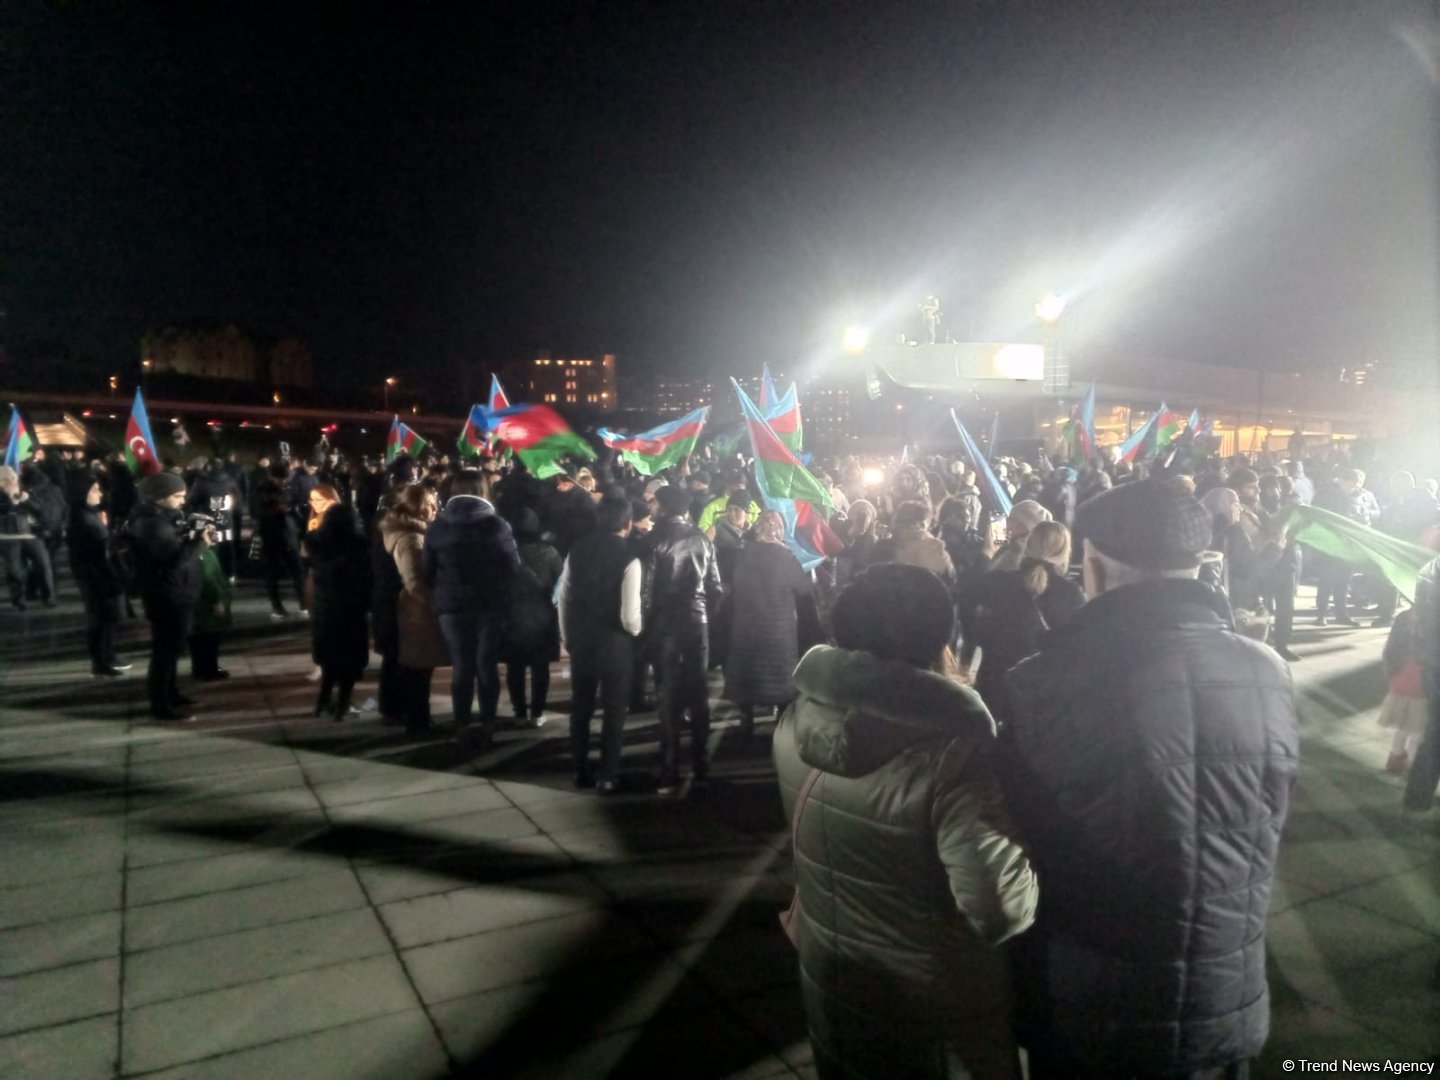 Bakuvians rejoicing over Ilham Aliyev's presidential election victory (PHOTO/VIDEO)